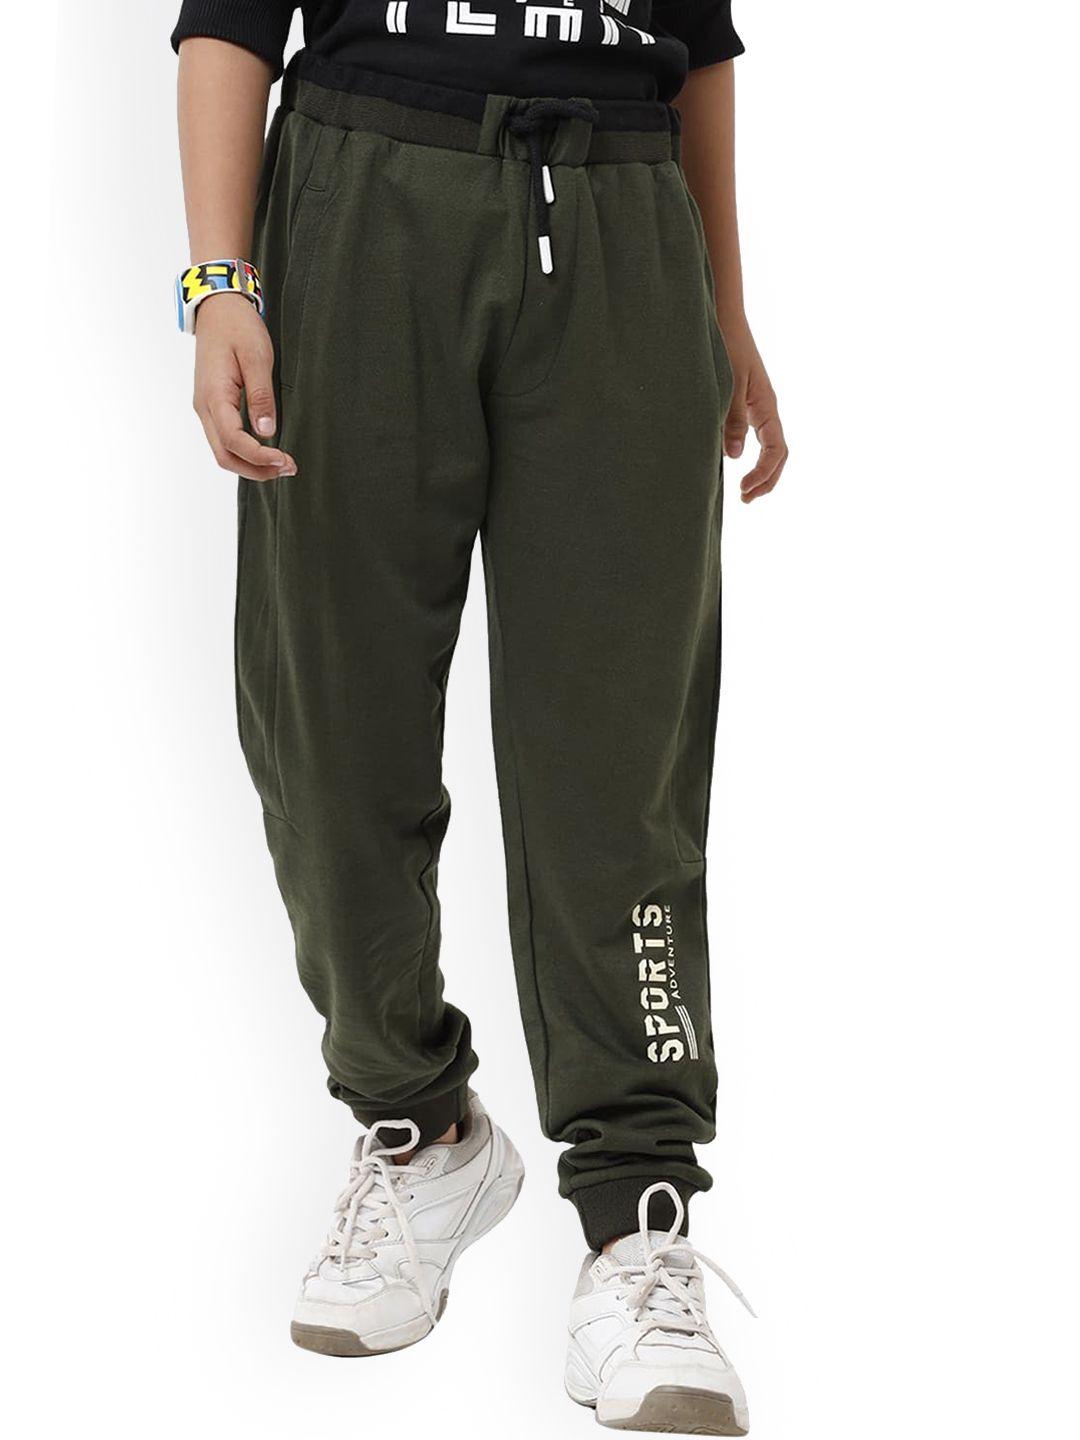 under fourteen only boys olive green joggers trousers